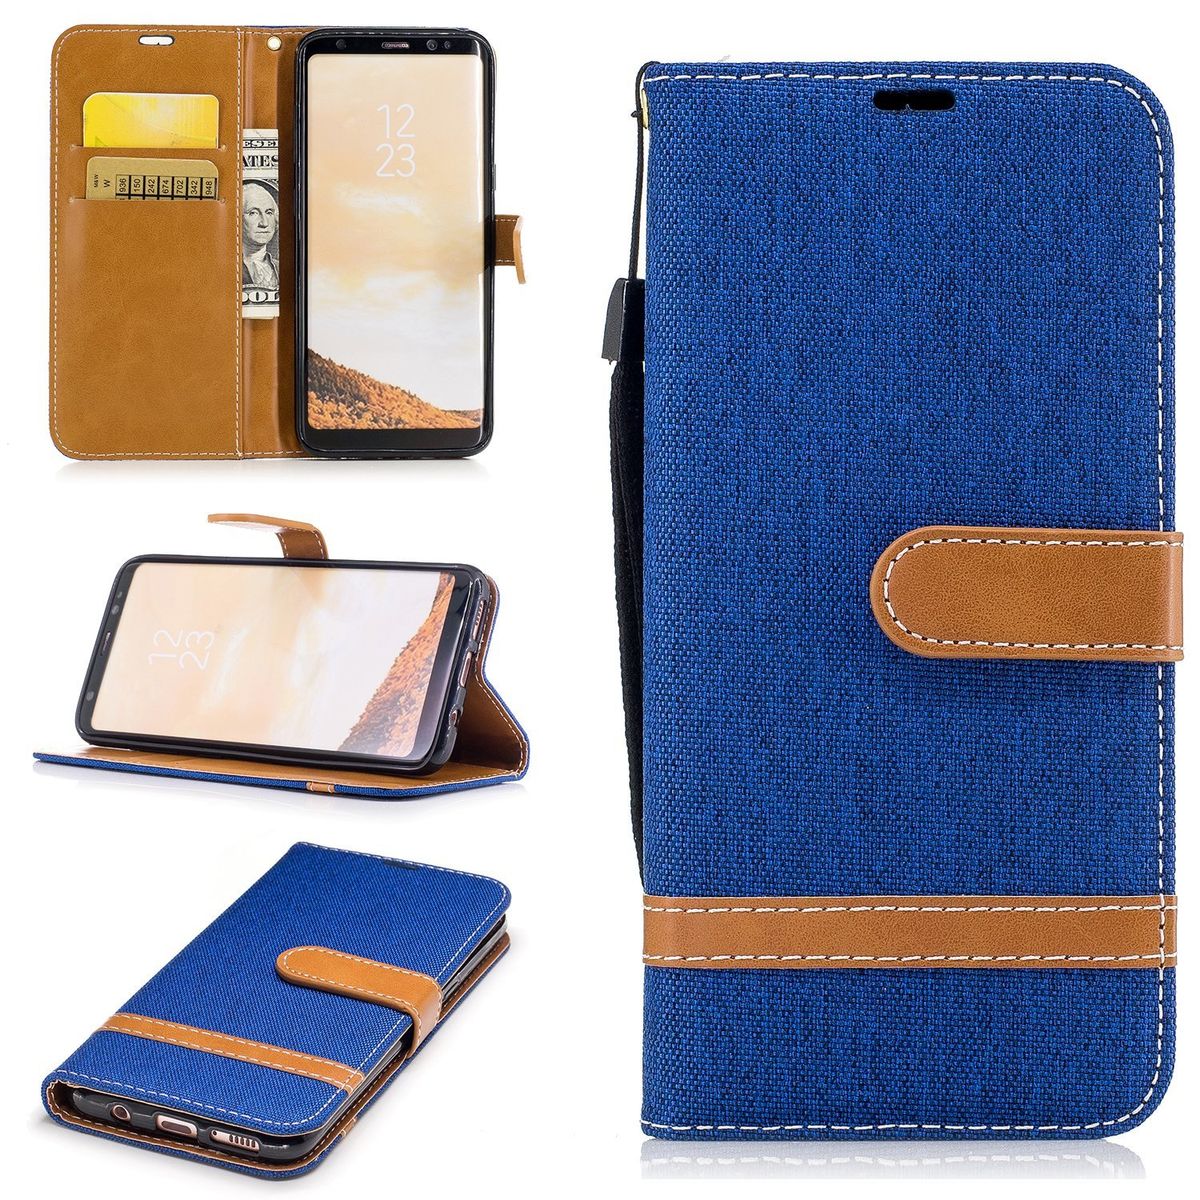 König Design mobile phone case compatible with Samsung Galaxy S8 protective wallet cover 360 case blue